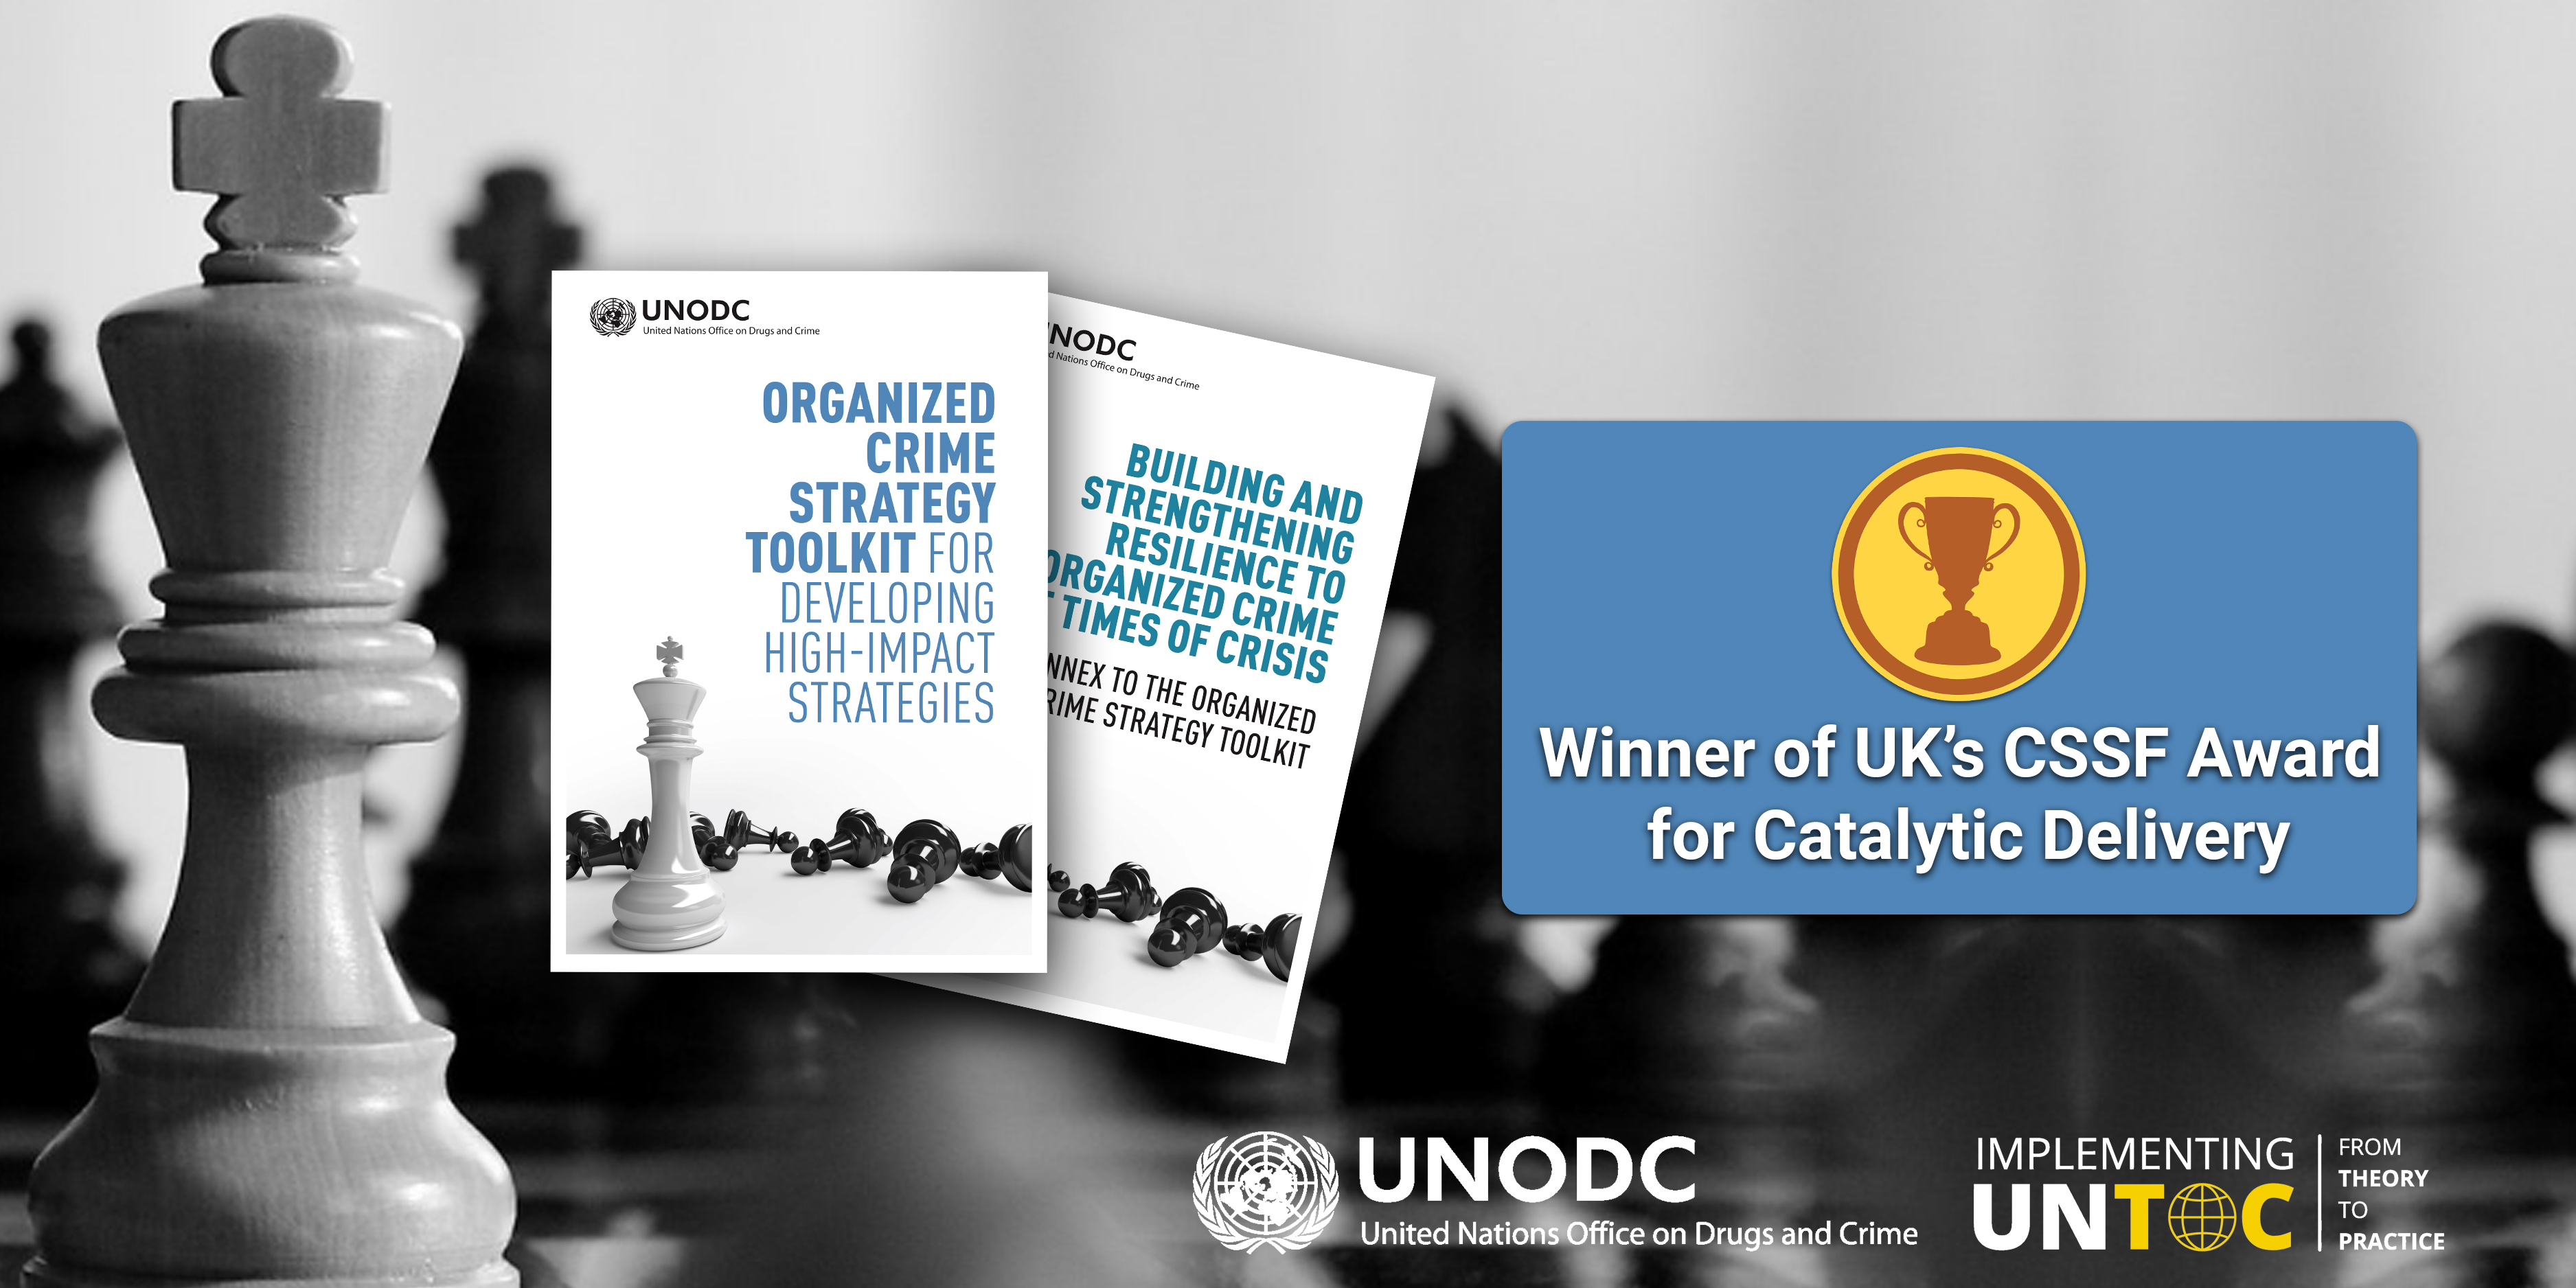 A visual with the logos of UNODC and the Global Programme on Implementing the Organized Crime Convention and text reading "Winner of UK's CSSF Award for Catalytic Delivery". The cover pages of the UNODC publications "Organized Crime Strategy Toolkit for Developing High-Impact Strategies" and "Building and Strengthening Resilience to Organized Crime at Times of Crisis - Annex to the Organized Crime Strategy Toolkit" also appear on the visual. 